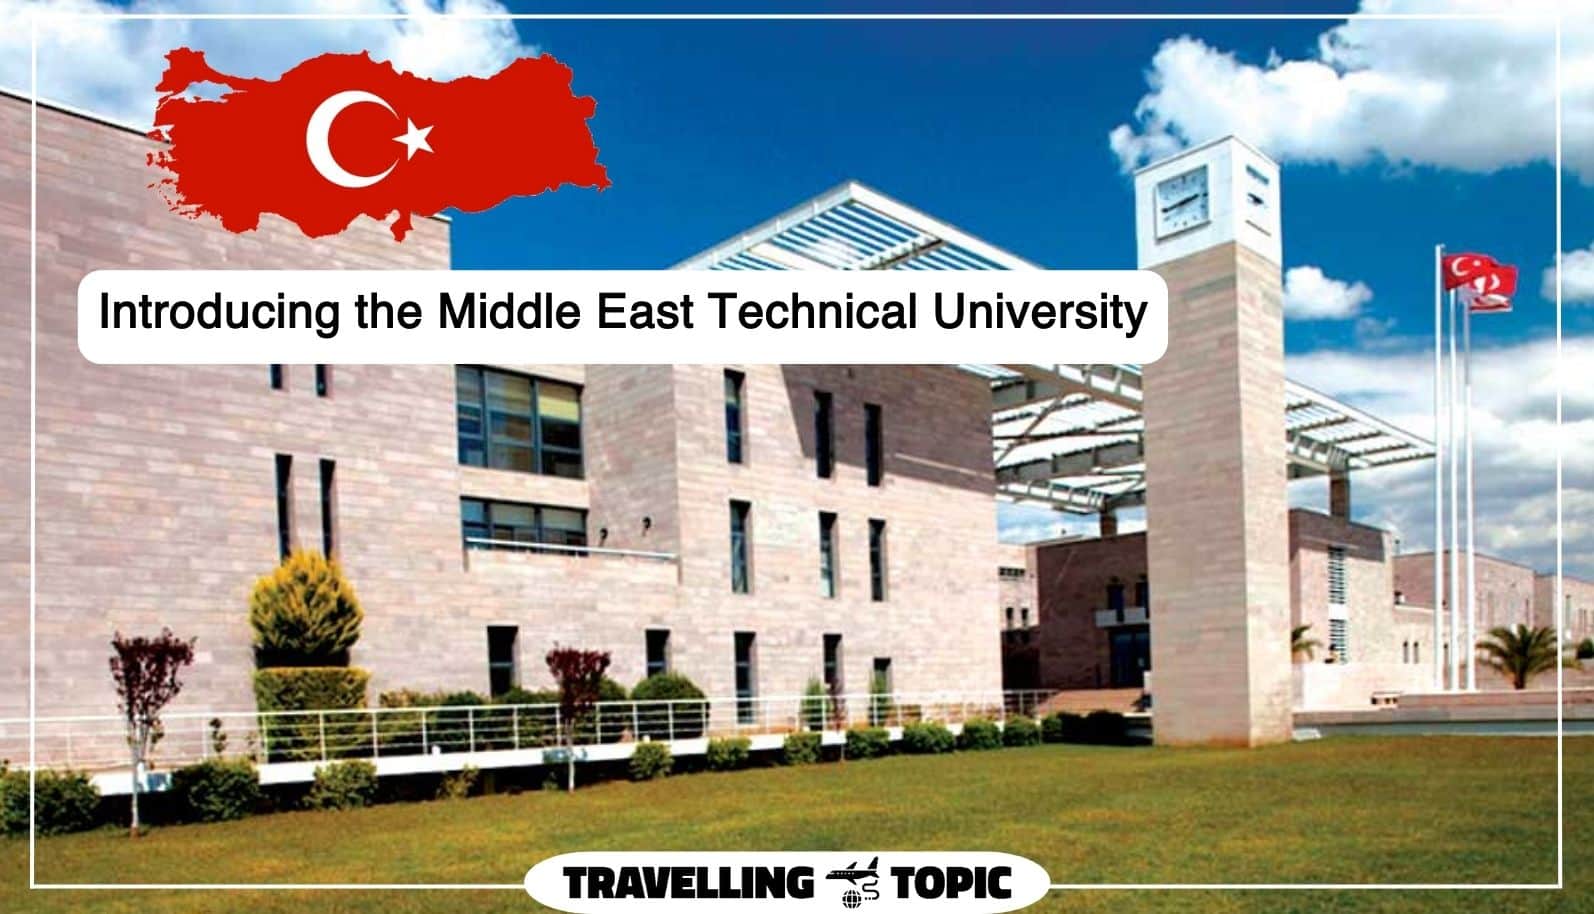 Introducing the Middle East Technical University